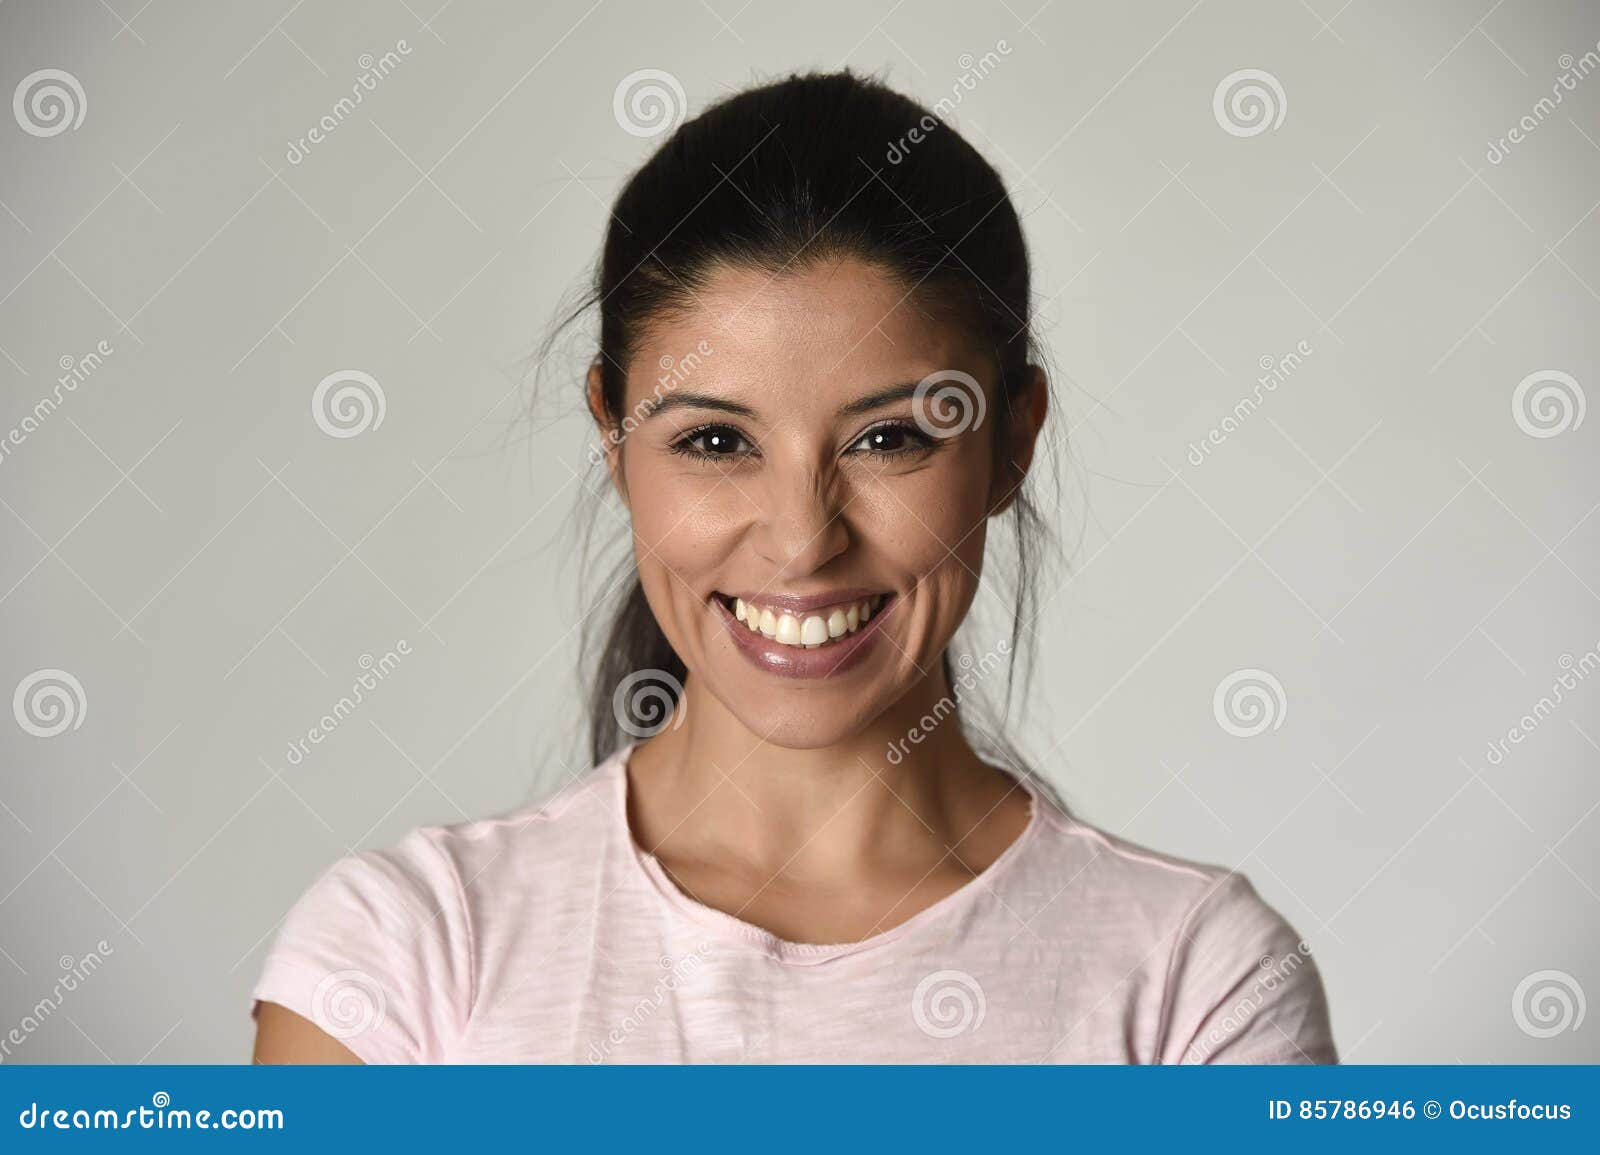 portrait of young beautiful and happy latin woman with big toothy smile excited and cheerful